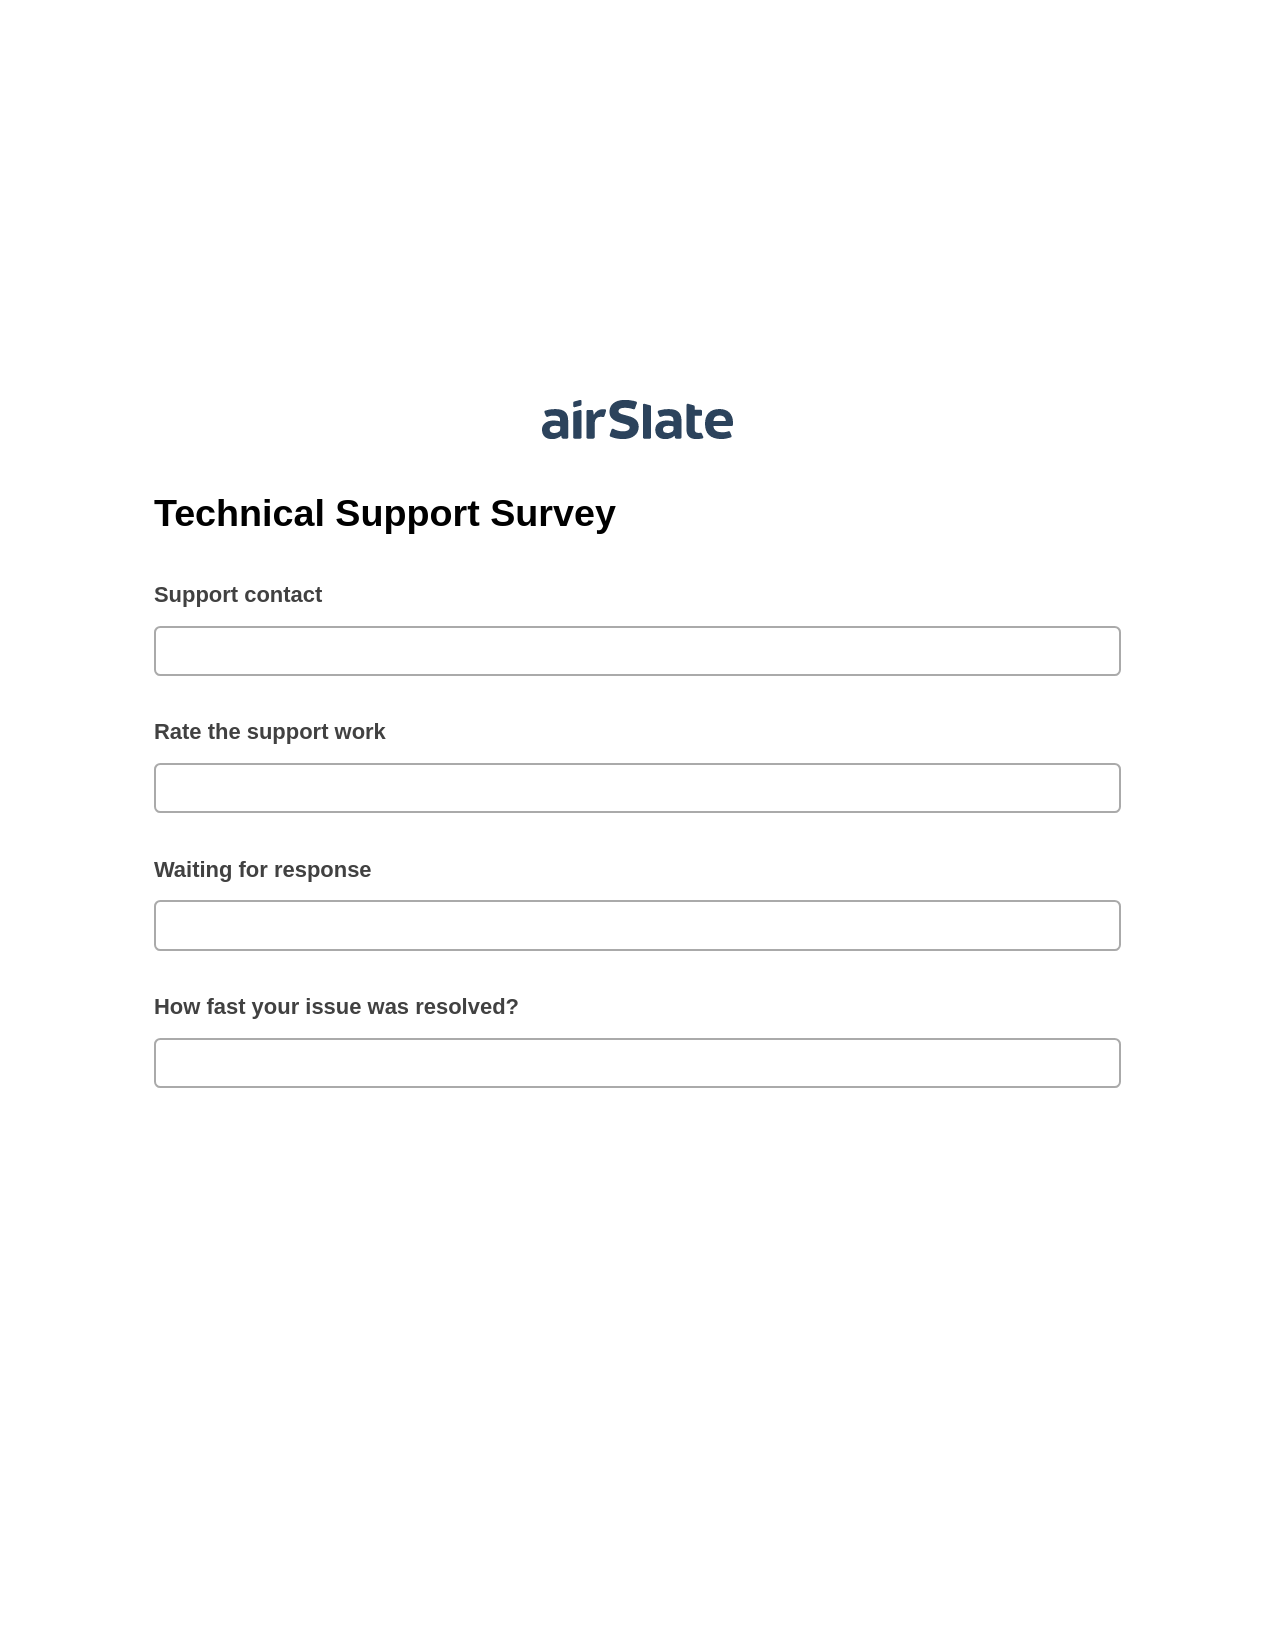 Multirole Technical Support Survey Pre-fill from Salesforce Records with SOQL Bot, Create slate addon, Archive to OneDrive Bot